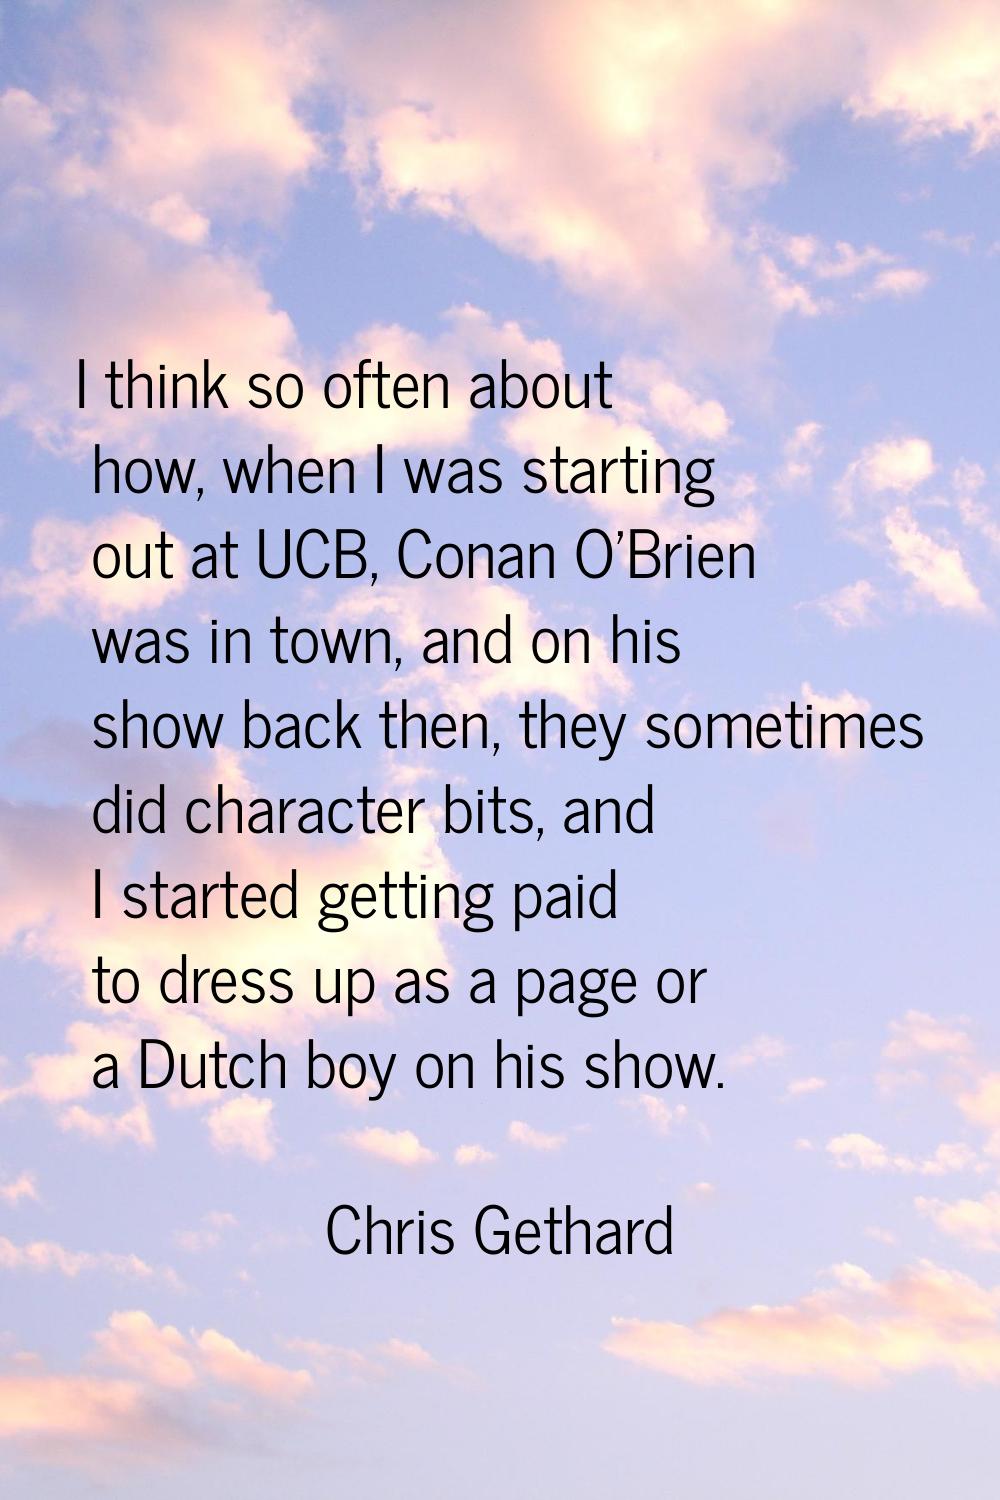 I think so often about how, when I was starting out at UCB, Conan O'Brien was in town, and on his s